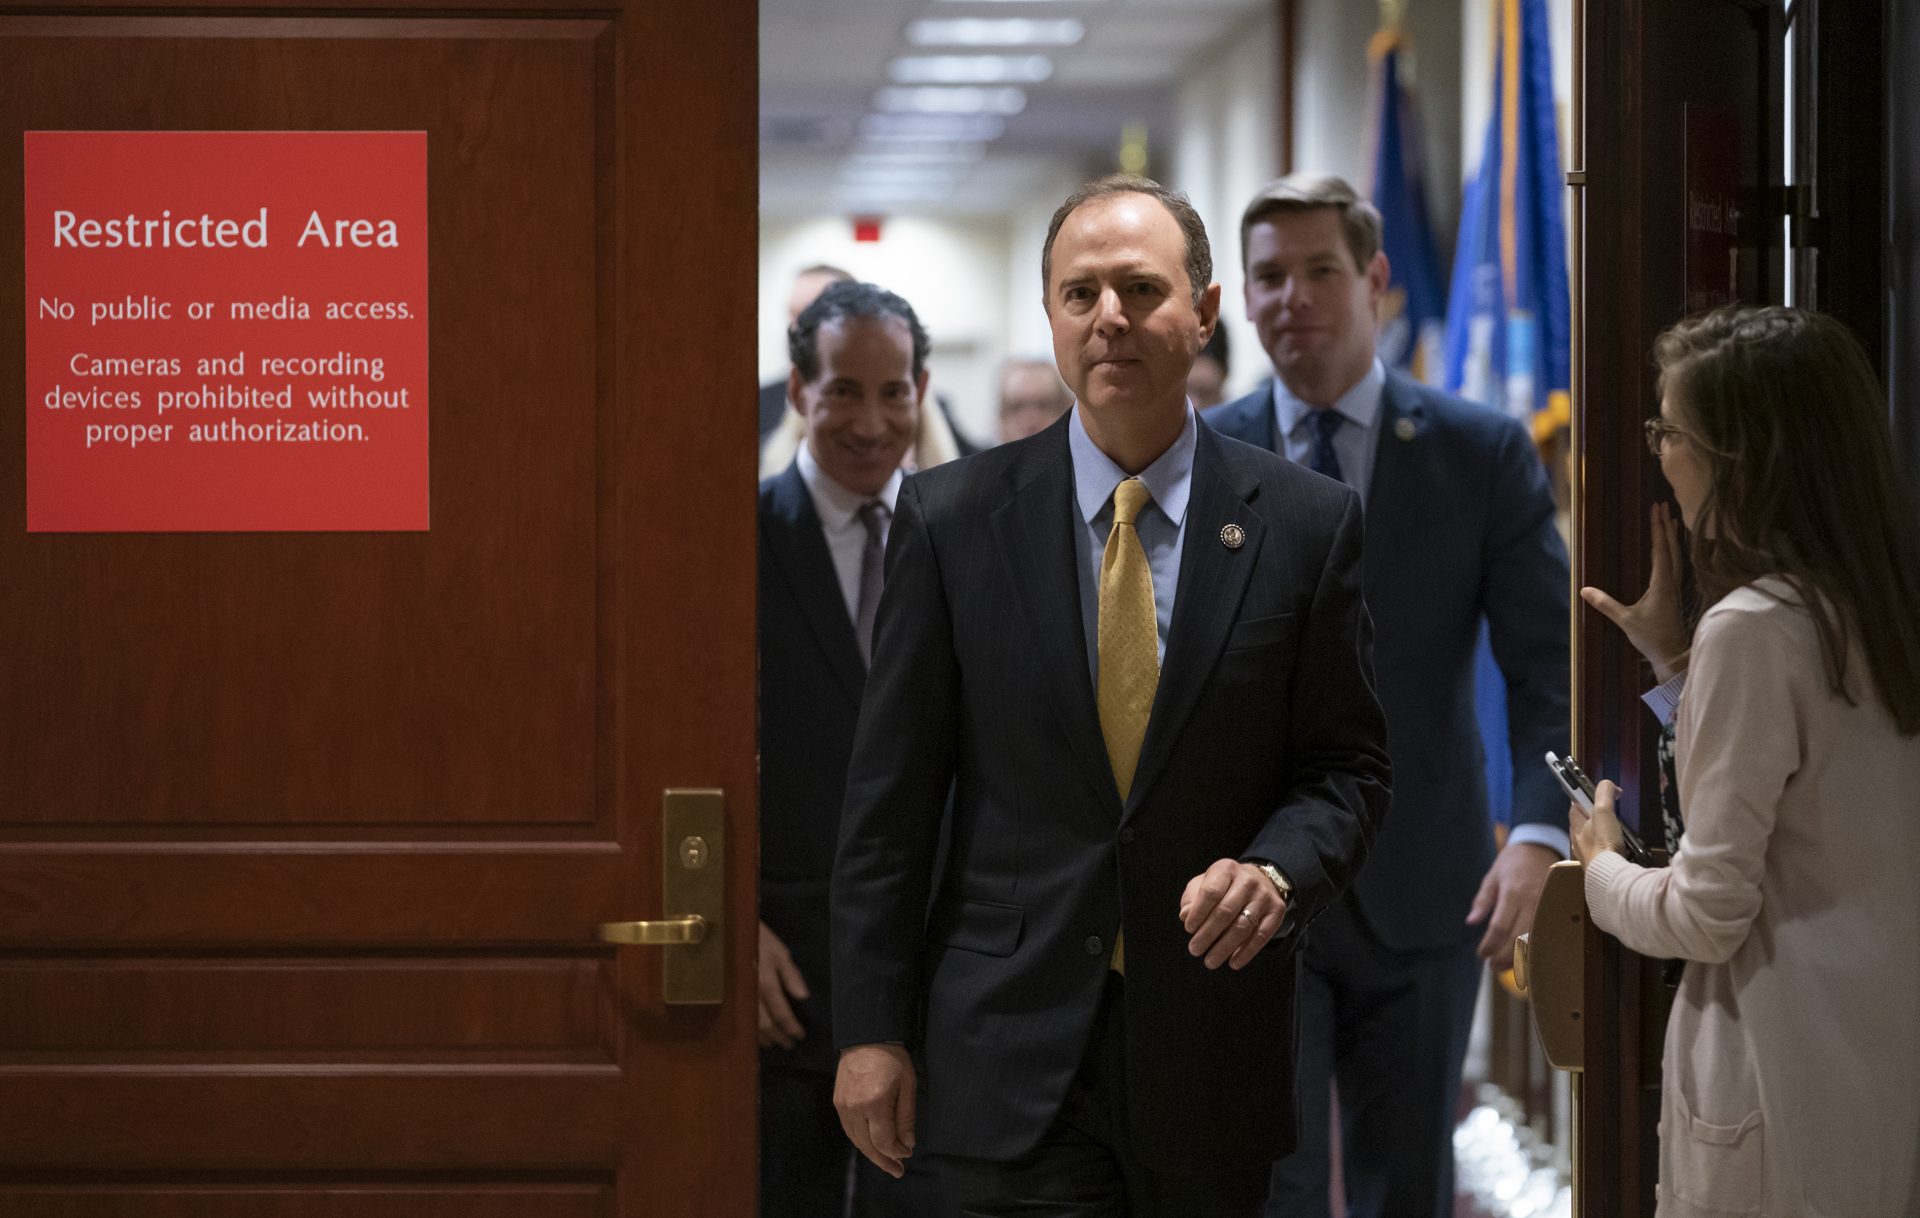 House Intelligence Committee Chairman Adam Schiff, D-Calif., followed by Rep. Jamie Raskin, D-Md., left, and Rep. Eric Swalwell, D-Calif., leaves a secure area at the Capitol to speak to reporters, in Washington, Monday, Oct. 28, 2019. Schiff announced that former deputy national security adviser Charles Kupperman failed to appear to be interviewed in the impeachment inquiry of President Donald Trump as lawmakers try to the determine if the president violated his oath of office by asking a foreign country, Ukraine, to investigate his political opponent, former Vice President Joe Biden, and his son Hunter Biden.